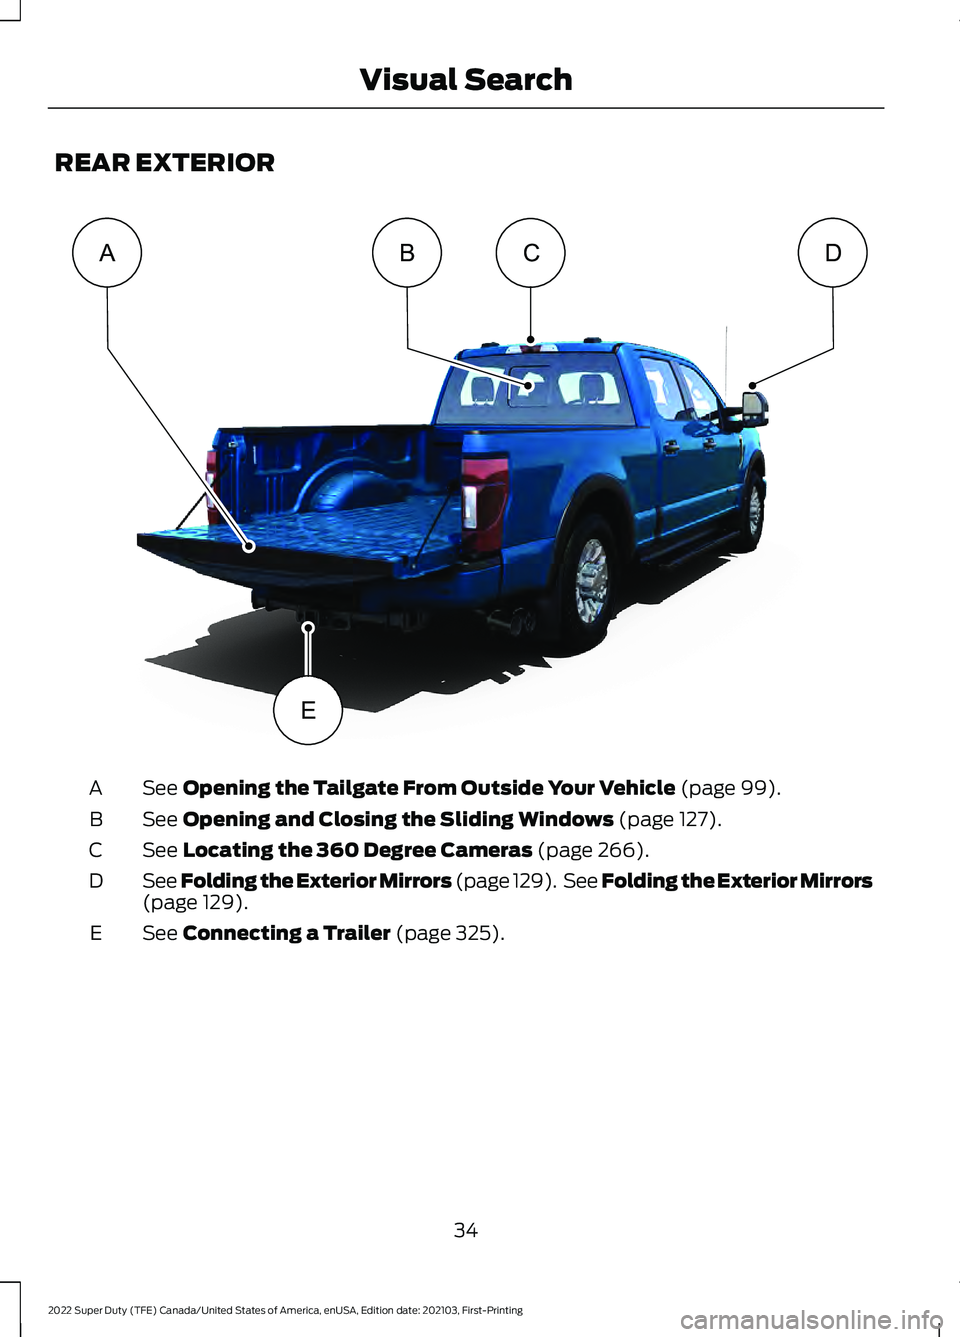 FORD F-450 2022 Owners Guide REAR EXTERIOR
See Opening the Tailgate From Outside Your Vehicle (page 99).
A
See 
Opening and Closing the Sliding Windows (page 127).
B
See 
Locating the 360 Degree Cameras (page 266).
C
See Folding 